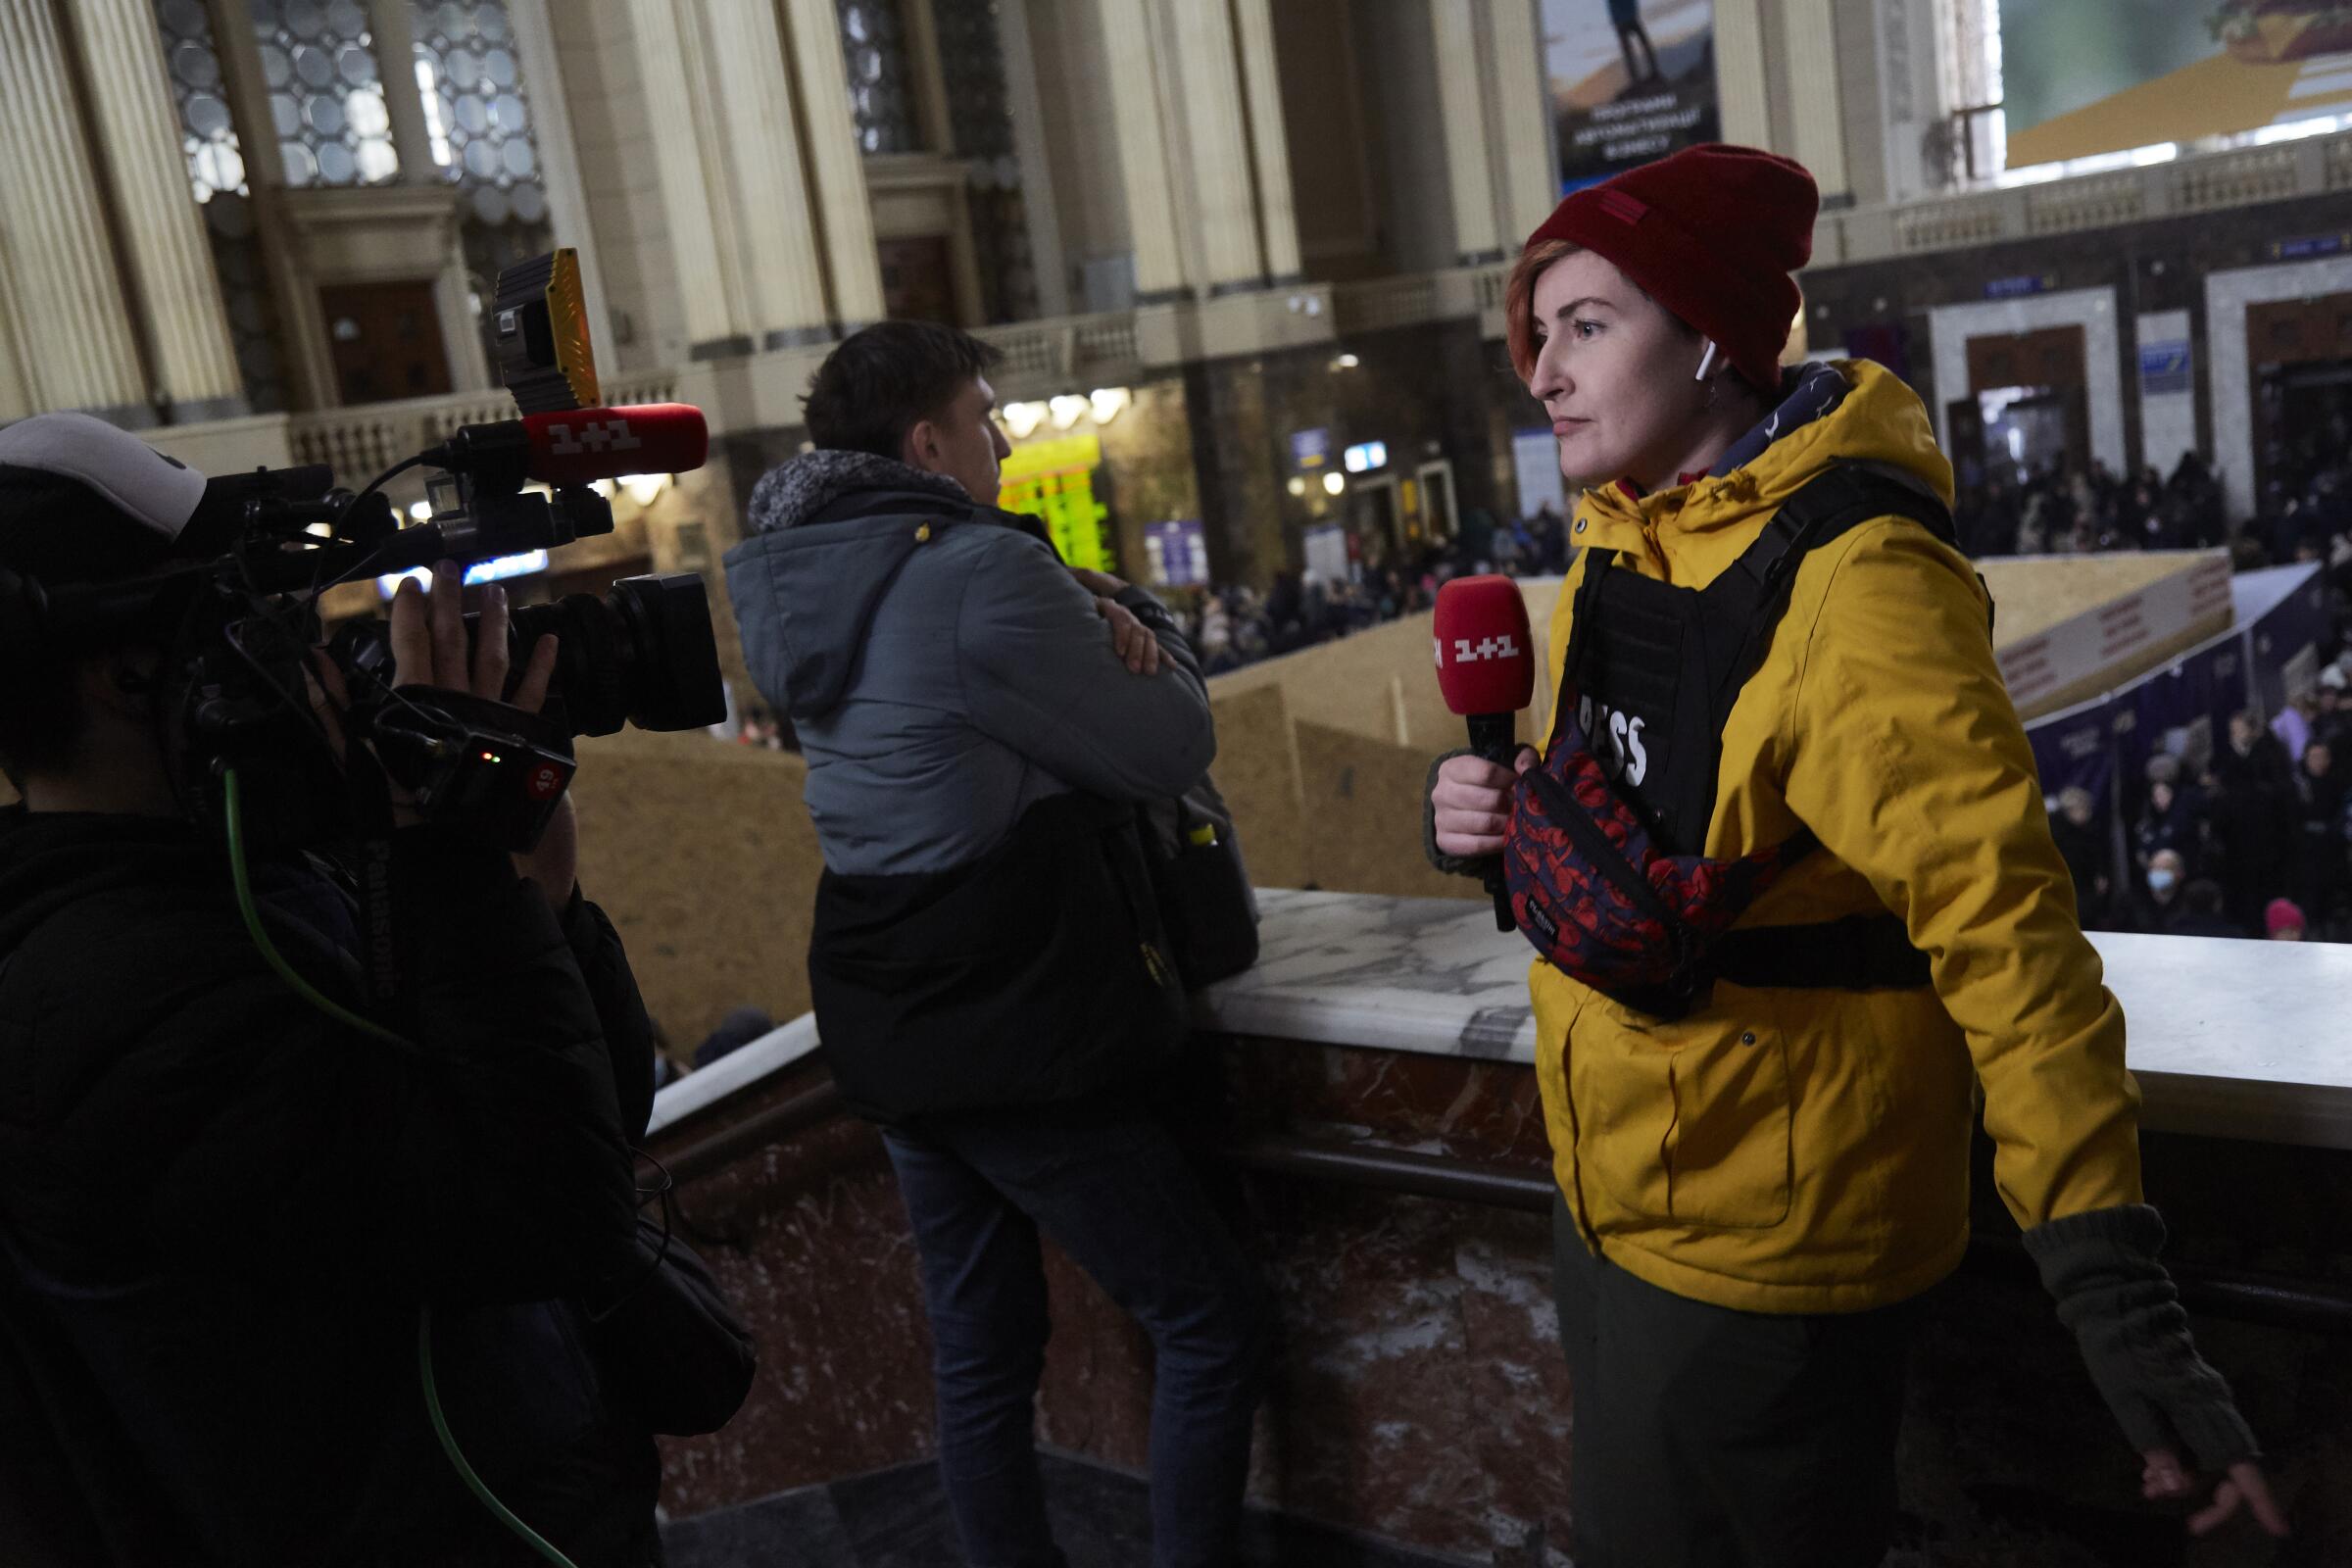 Local journalists at work on March 2 in Kyiv, Ukraine.